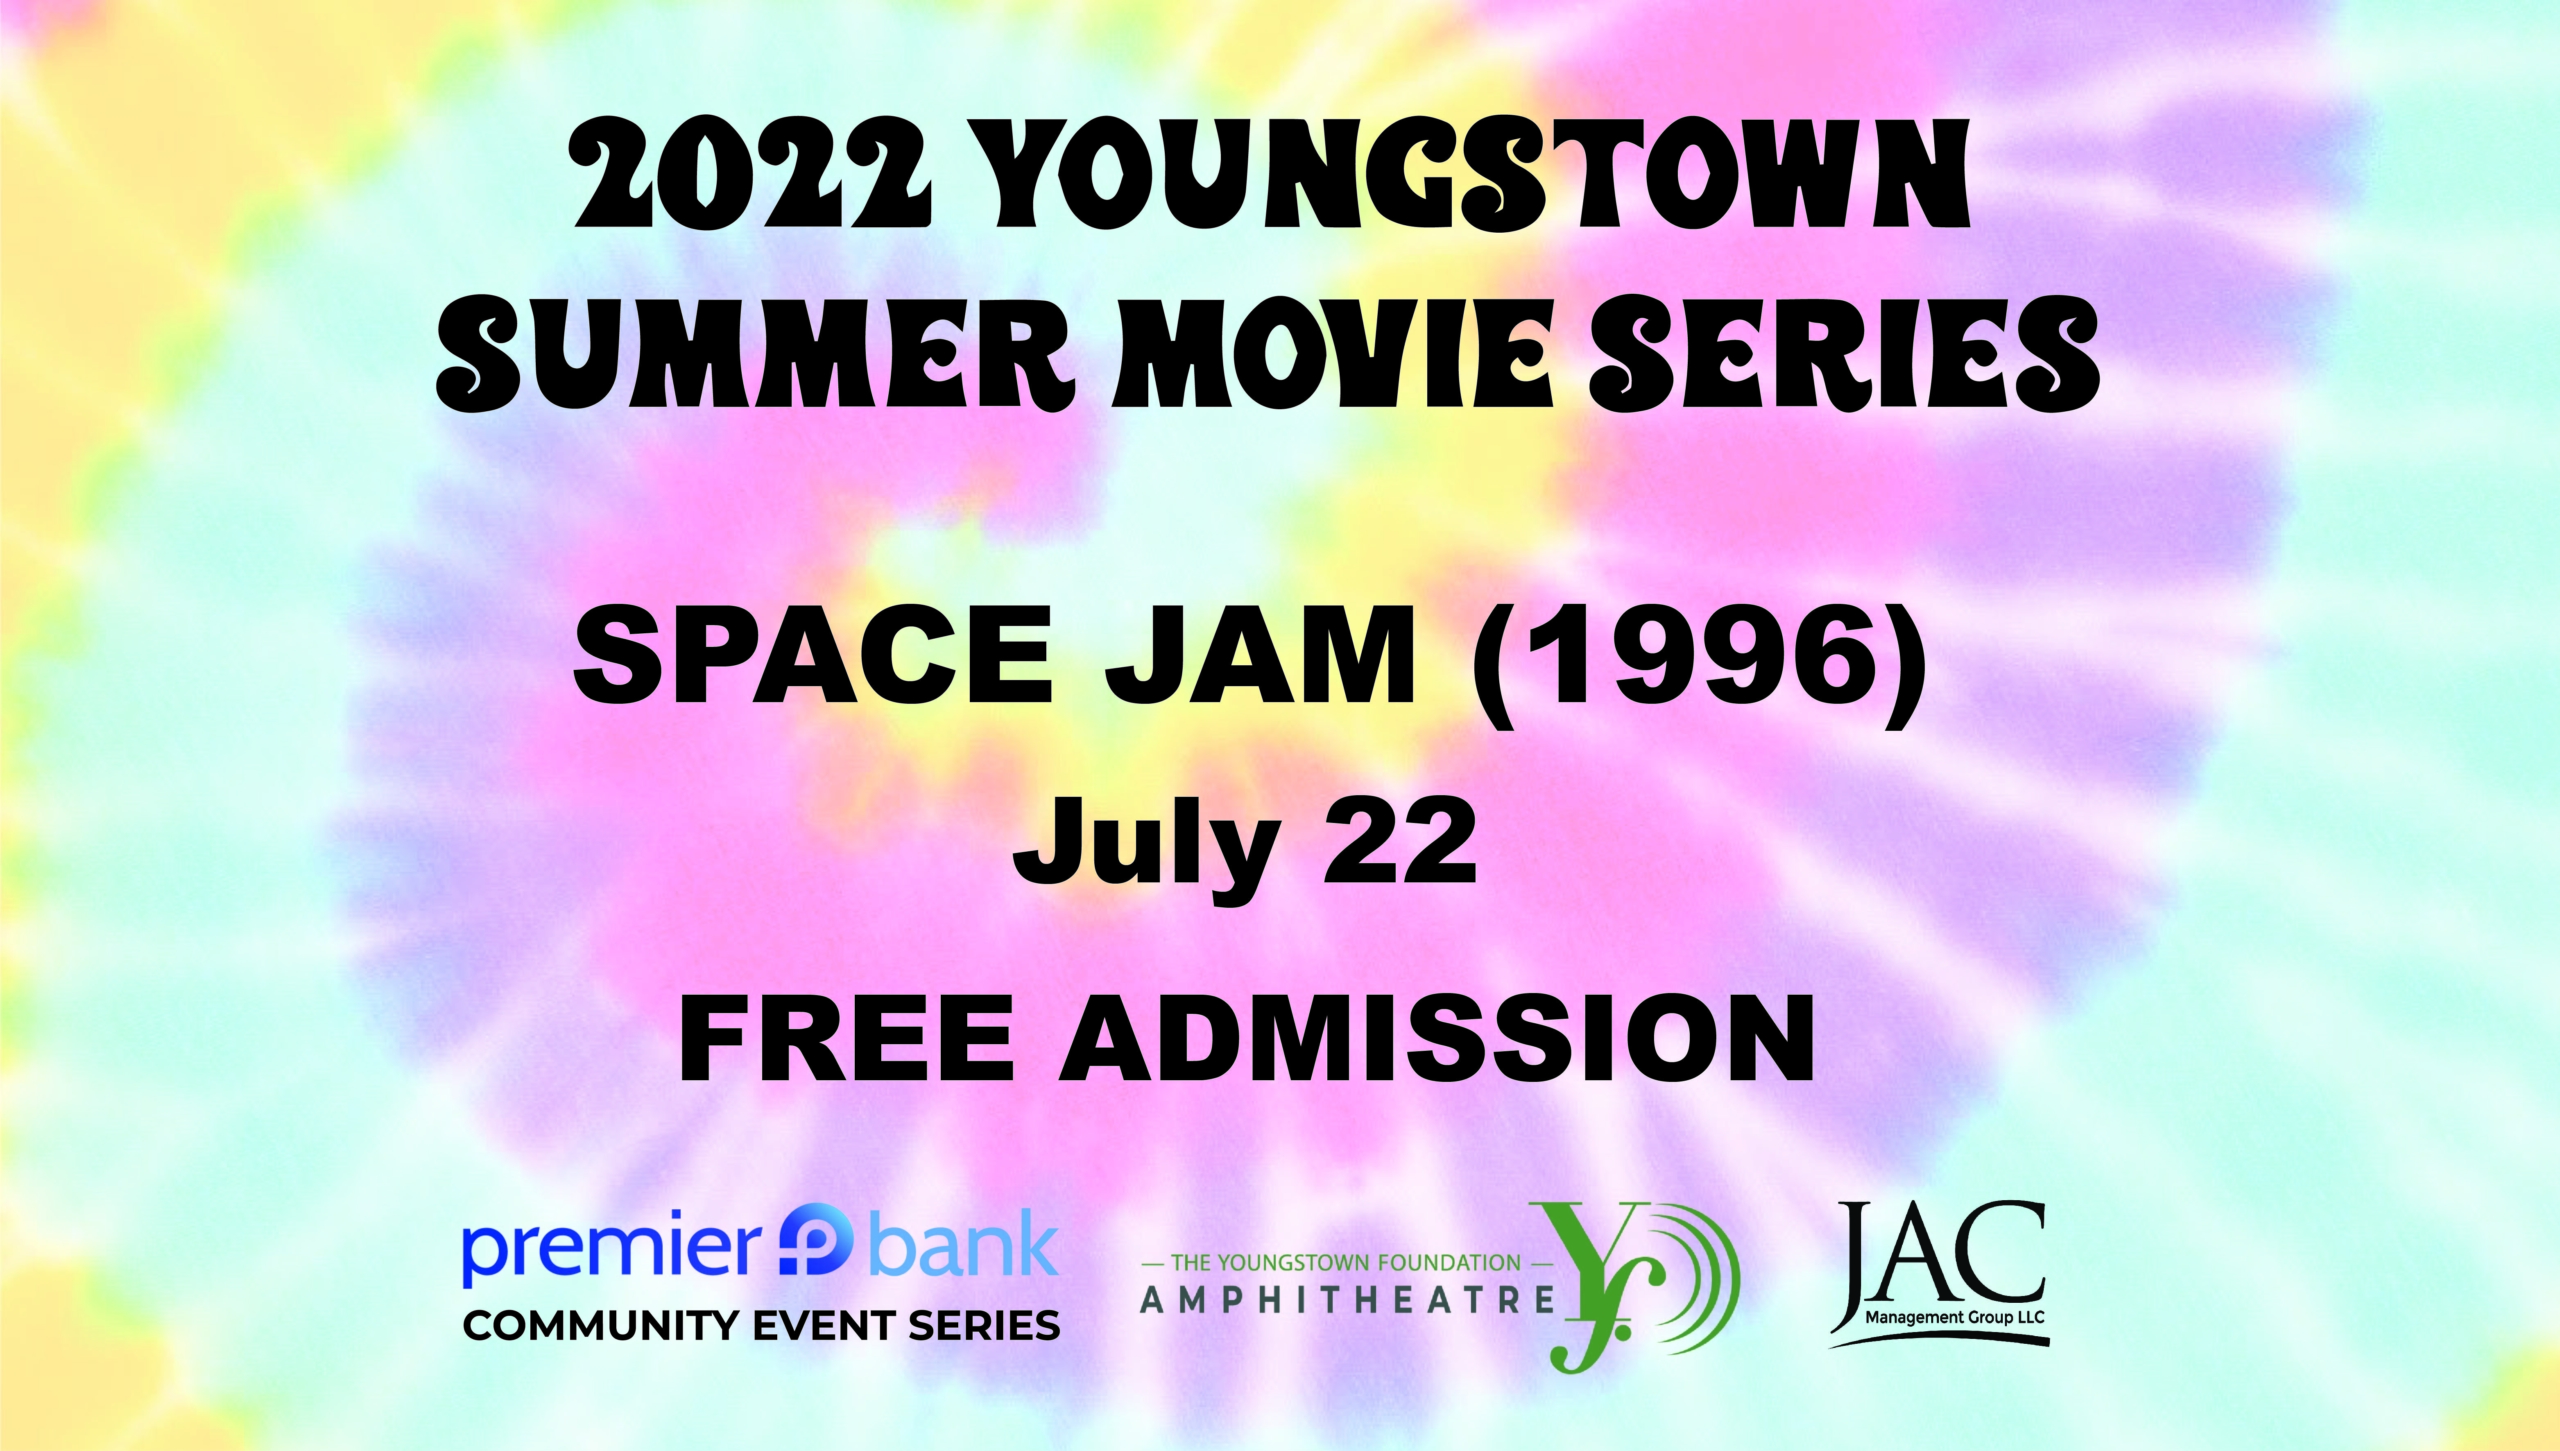 Youngstown Summer Movie Series: Space Jam.